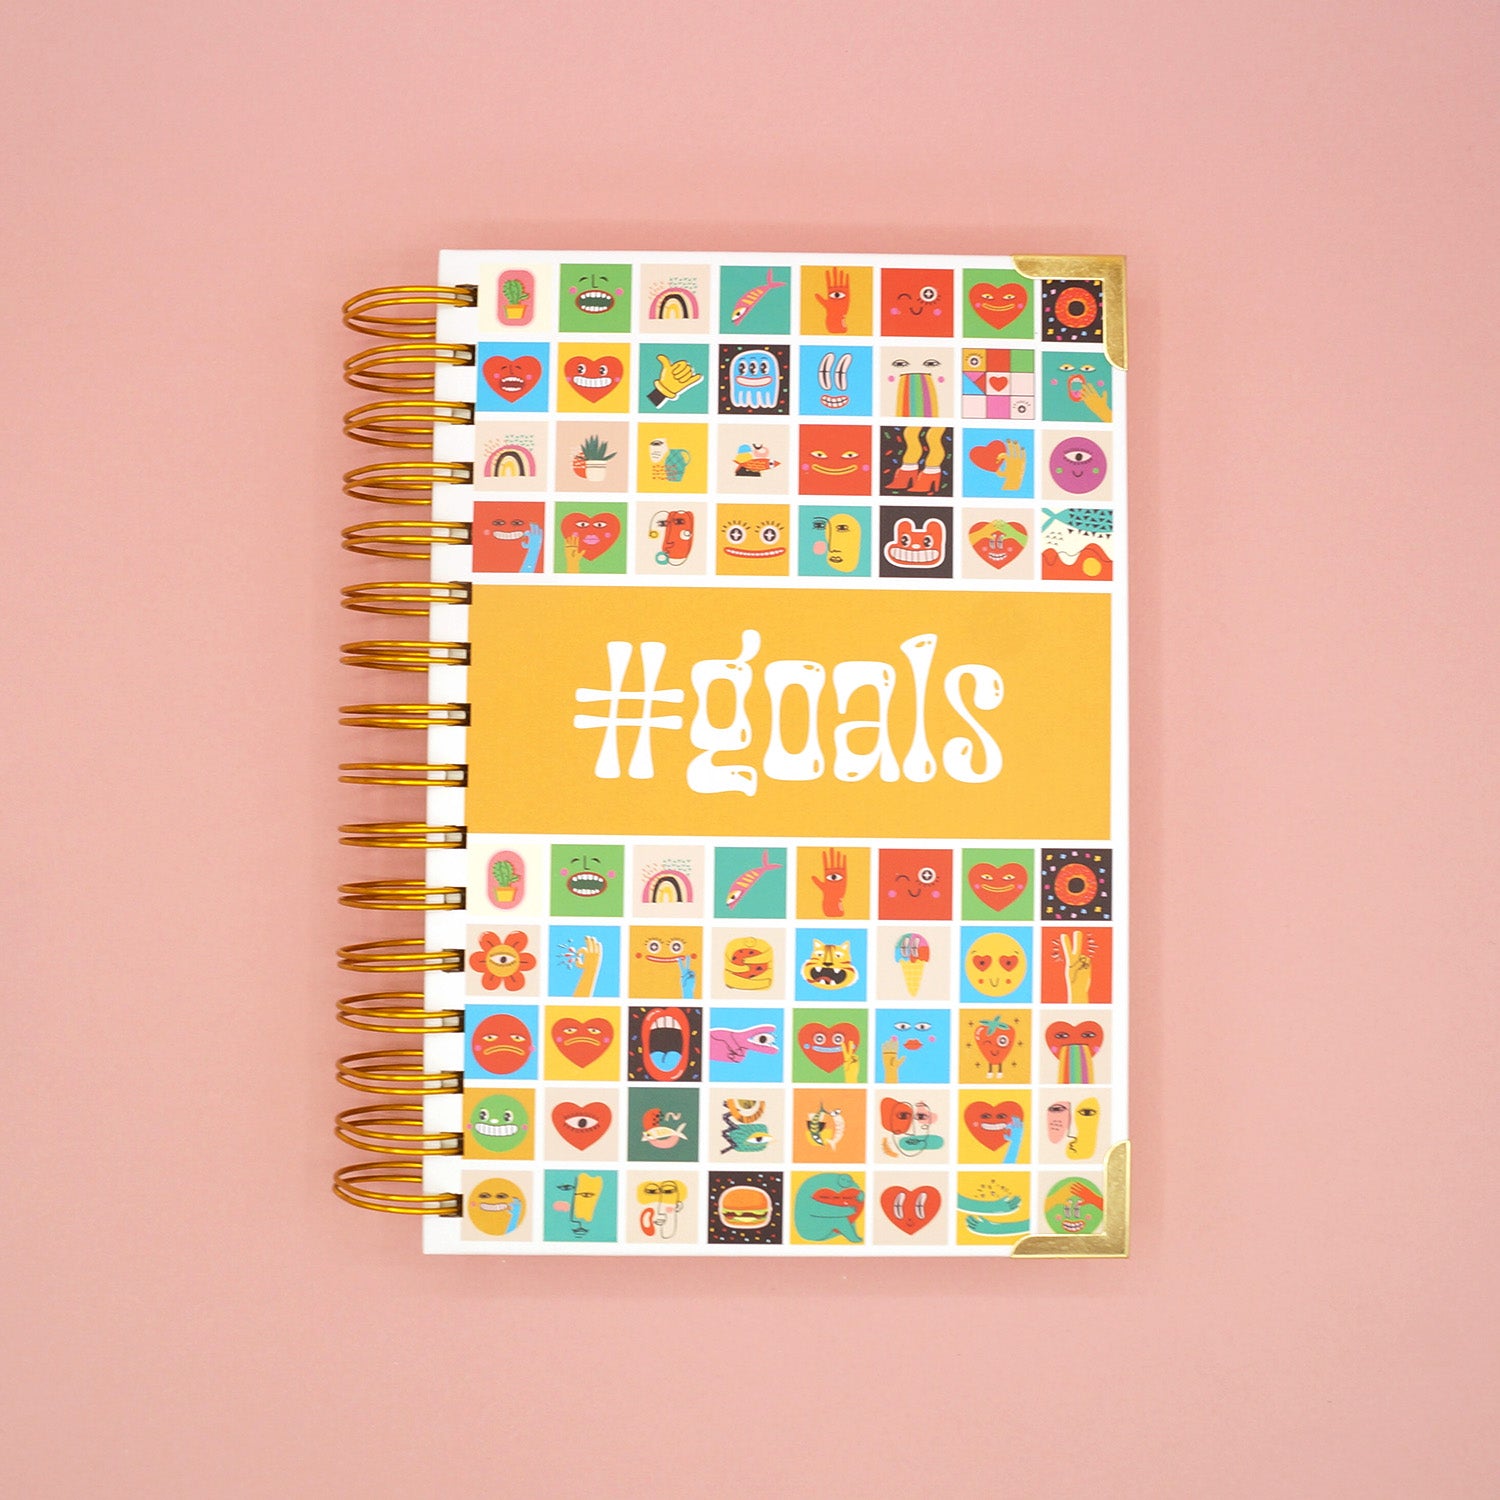 a notebook featuring #goals and emojis on the front cover